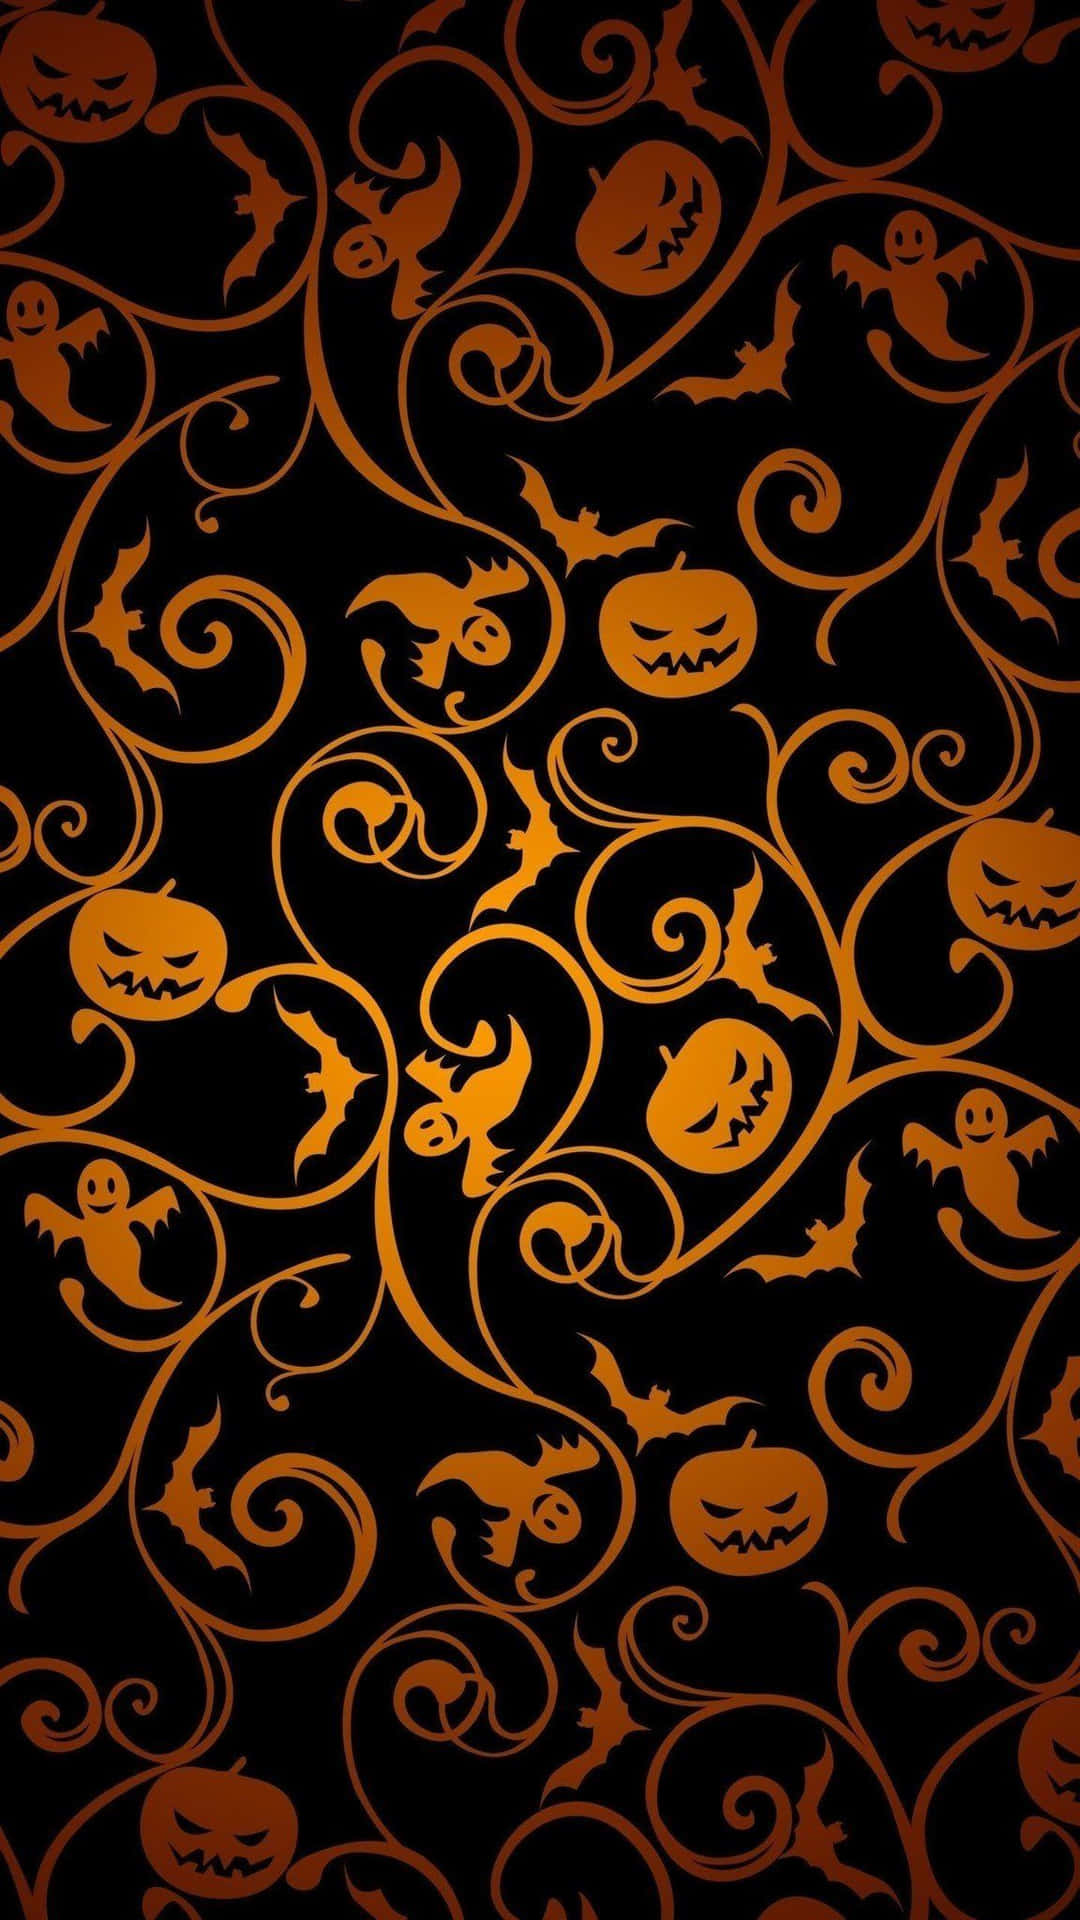 Get spooked out by this spooky iPhone Wallpaper